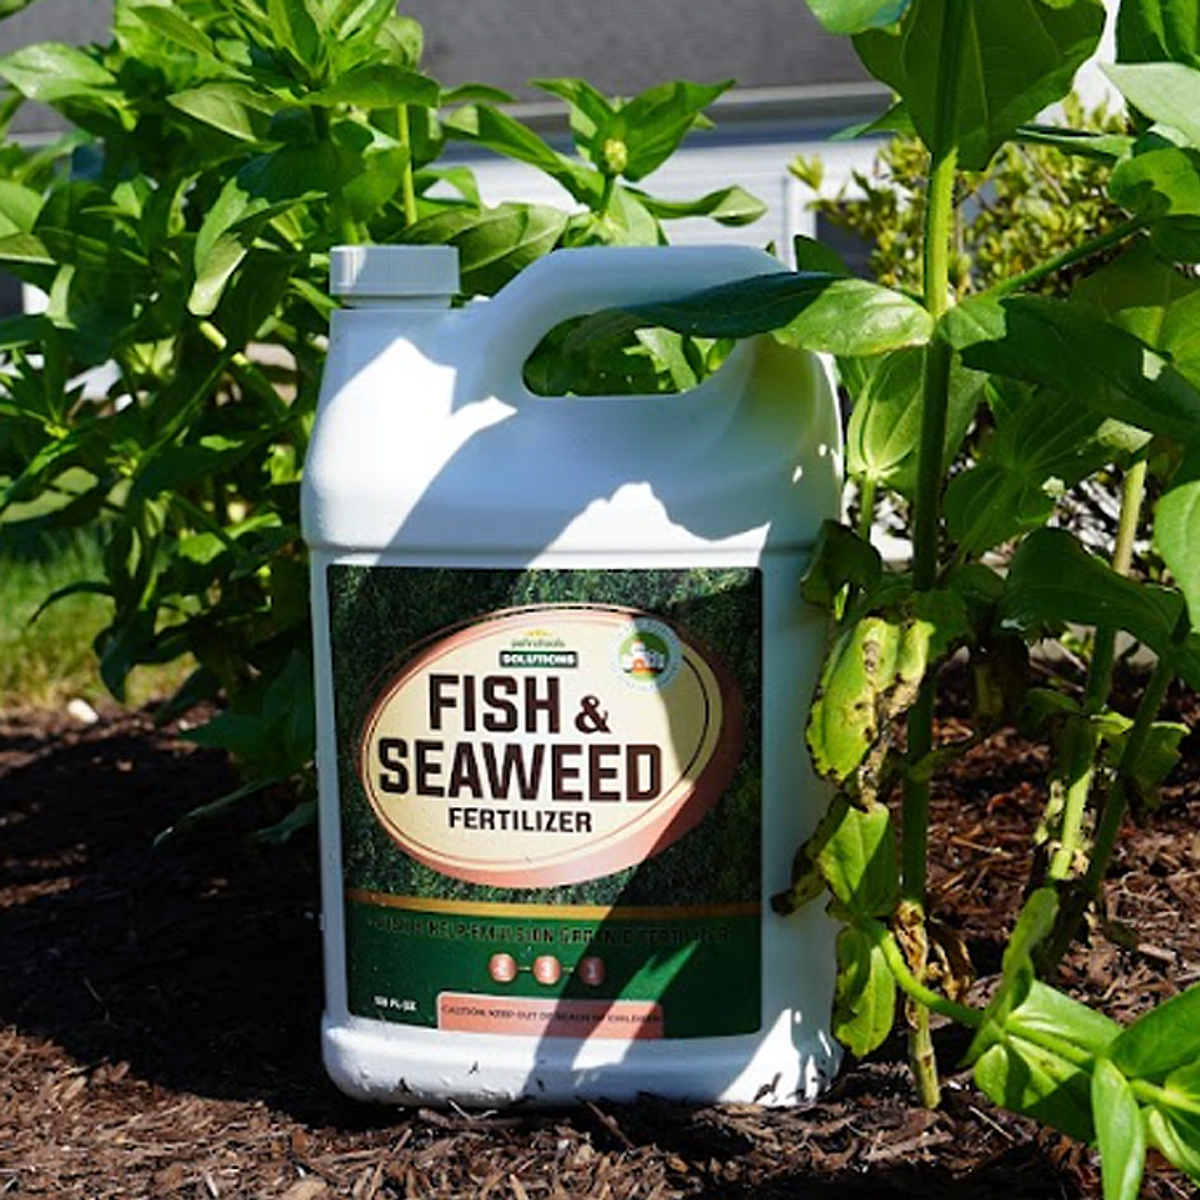 What's in Fish & Seaweed Fertilizer?